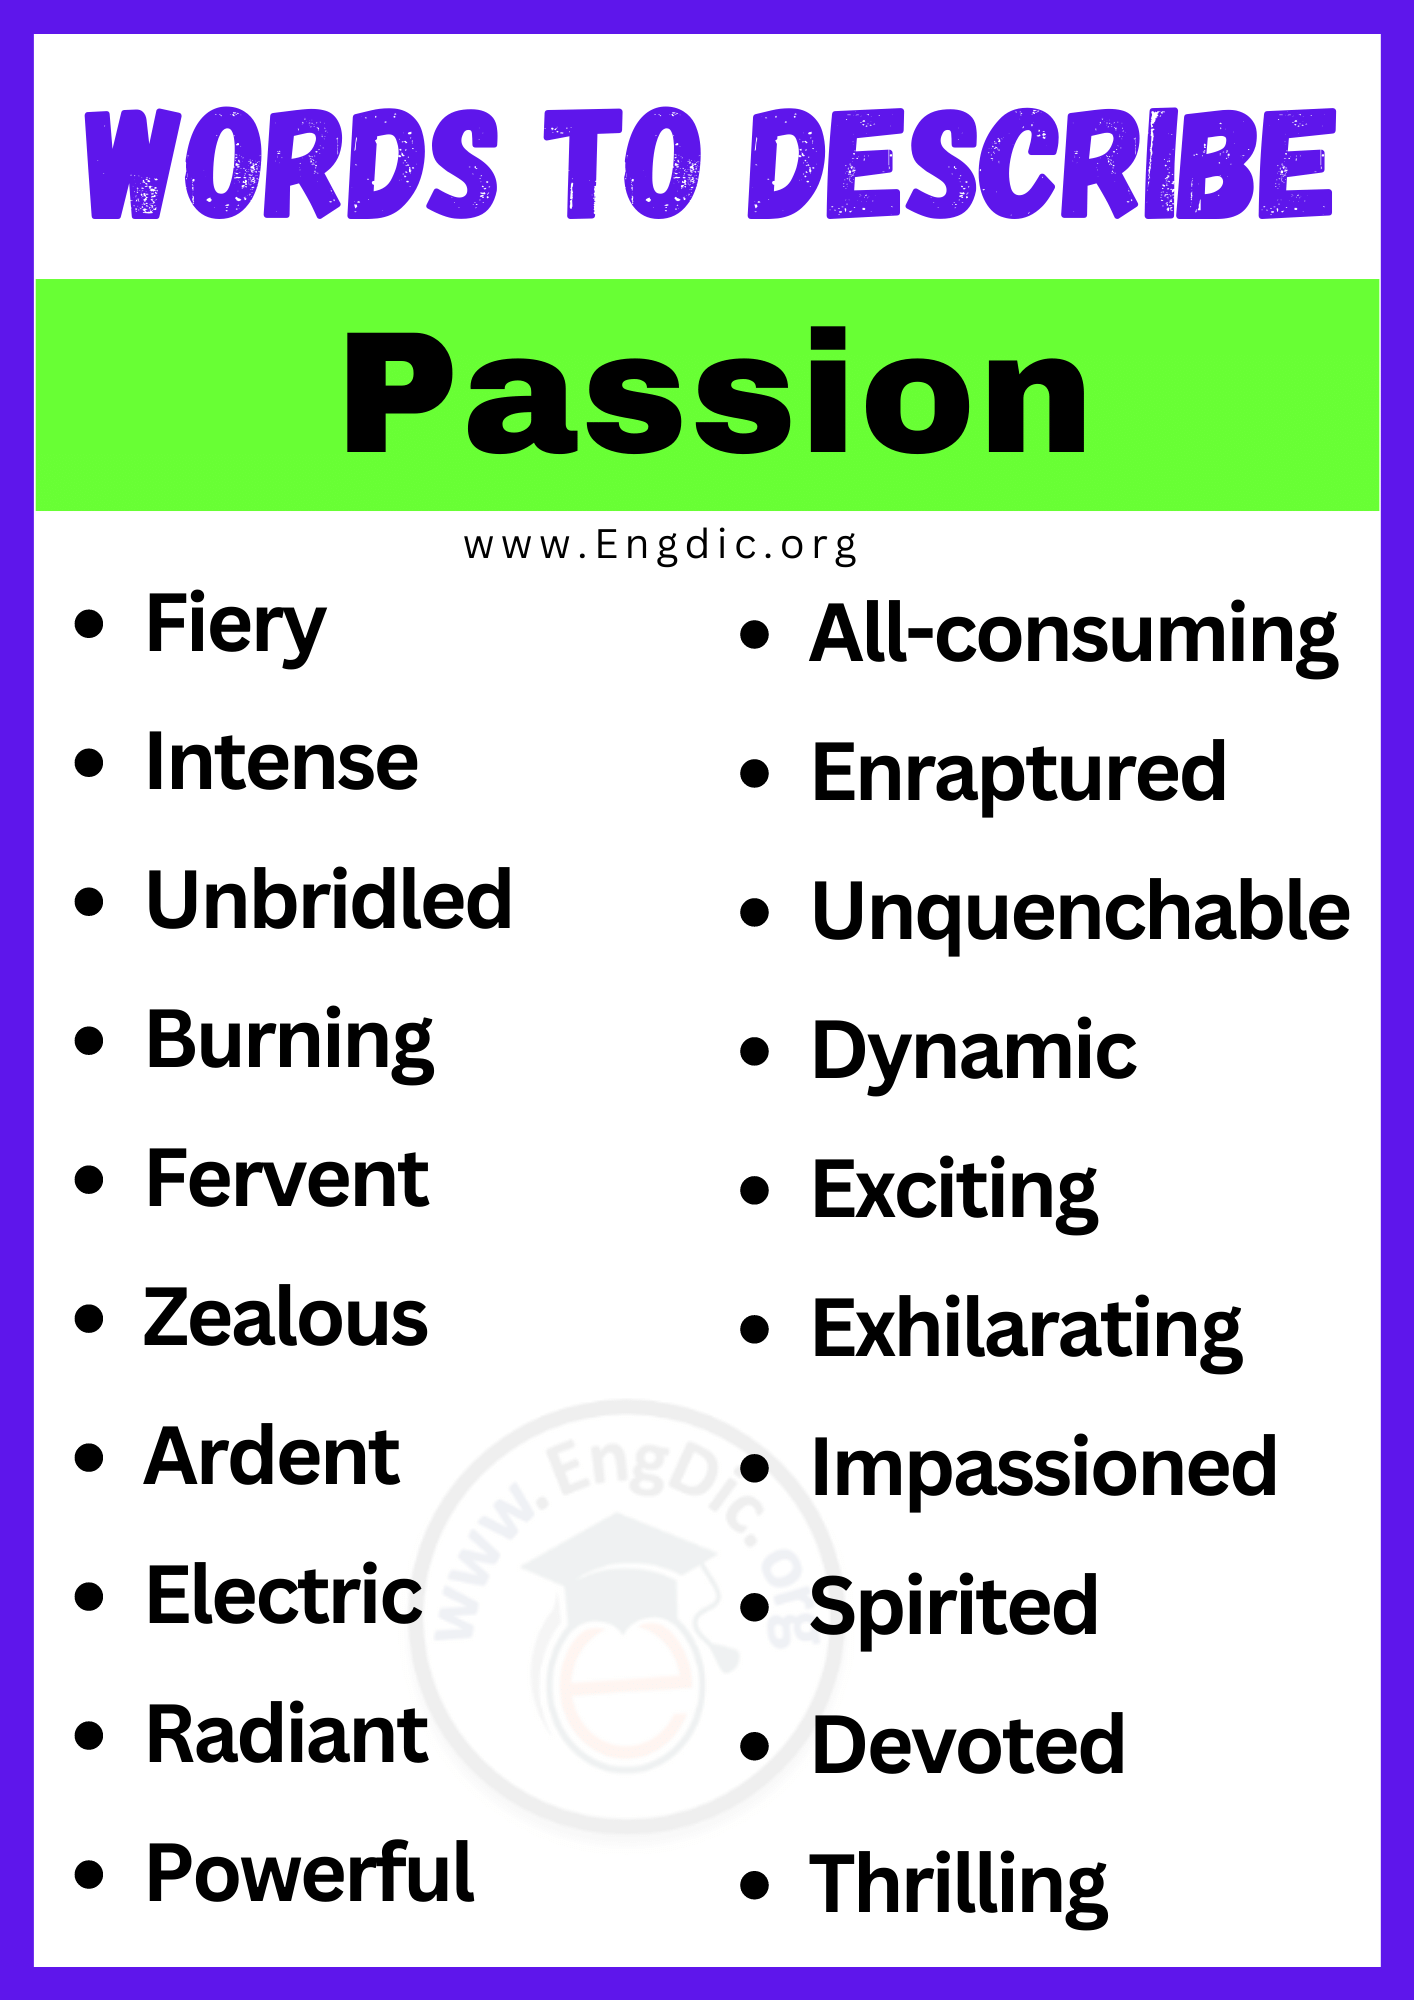 Words to Describe Passion